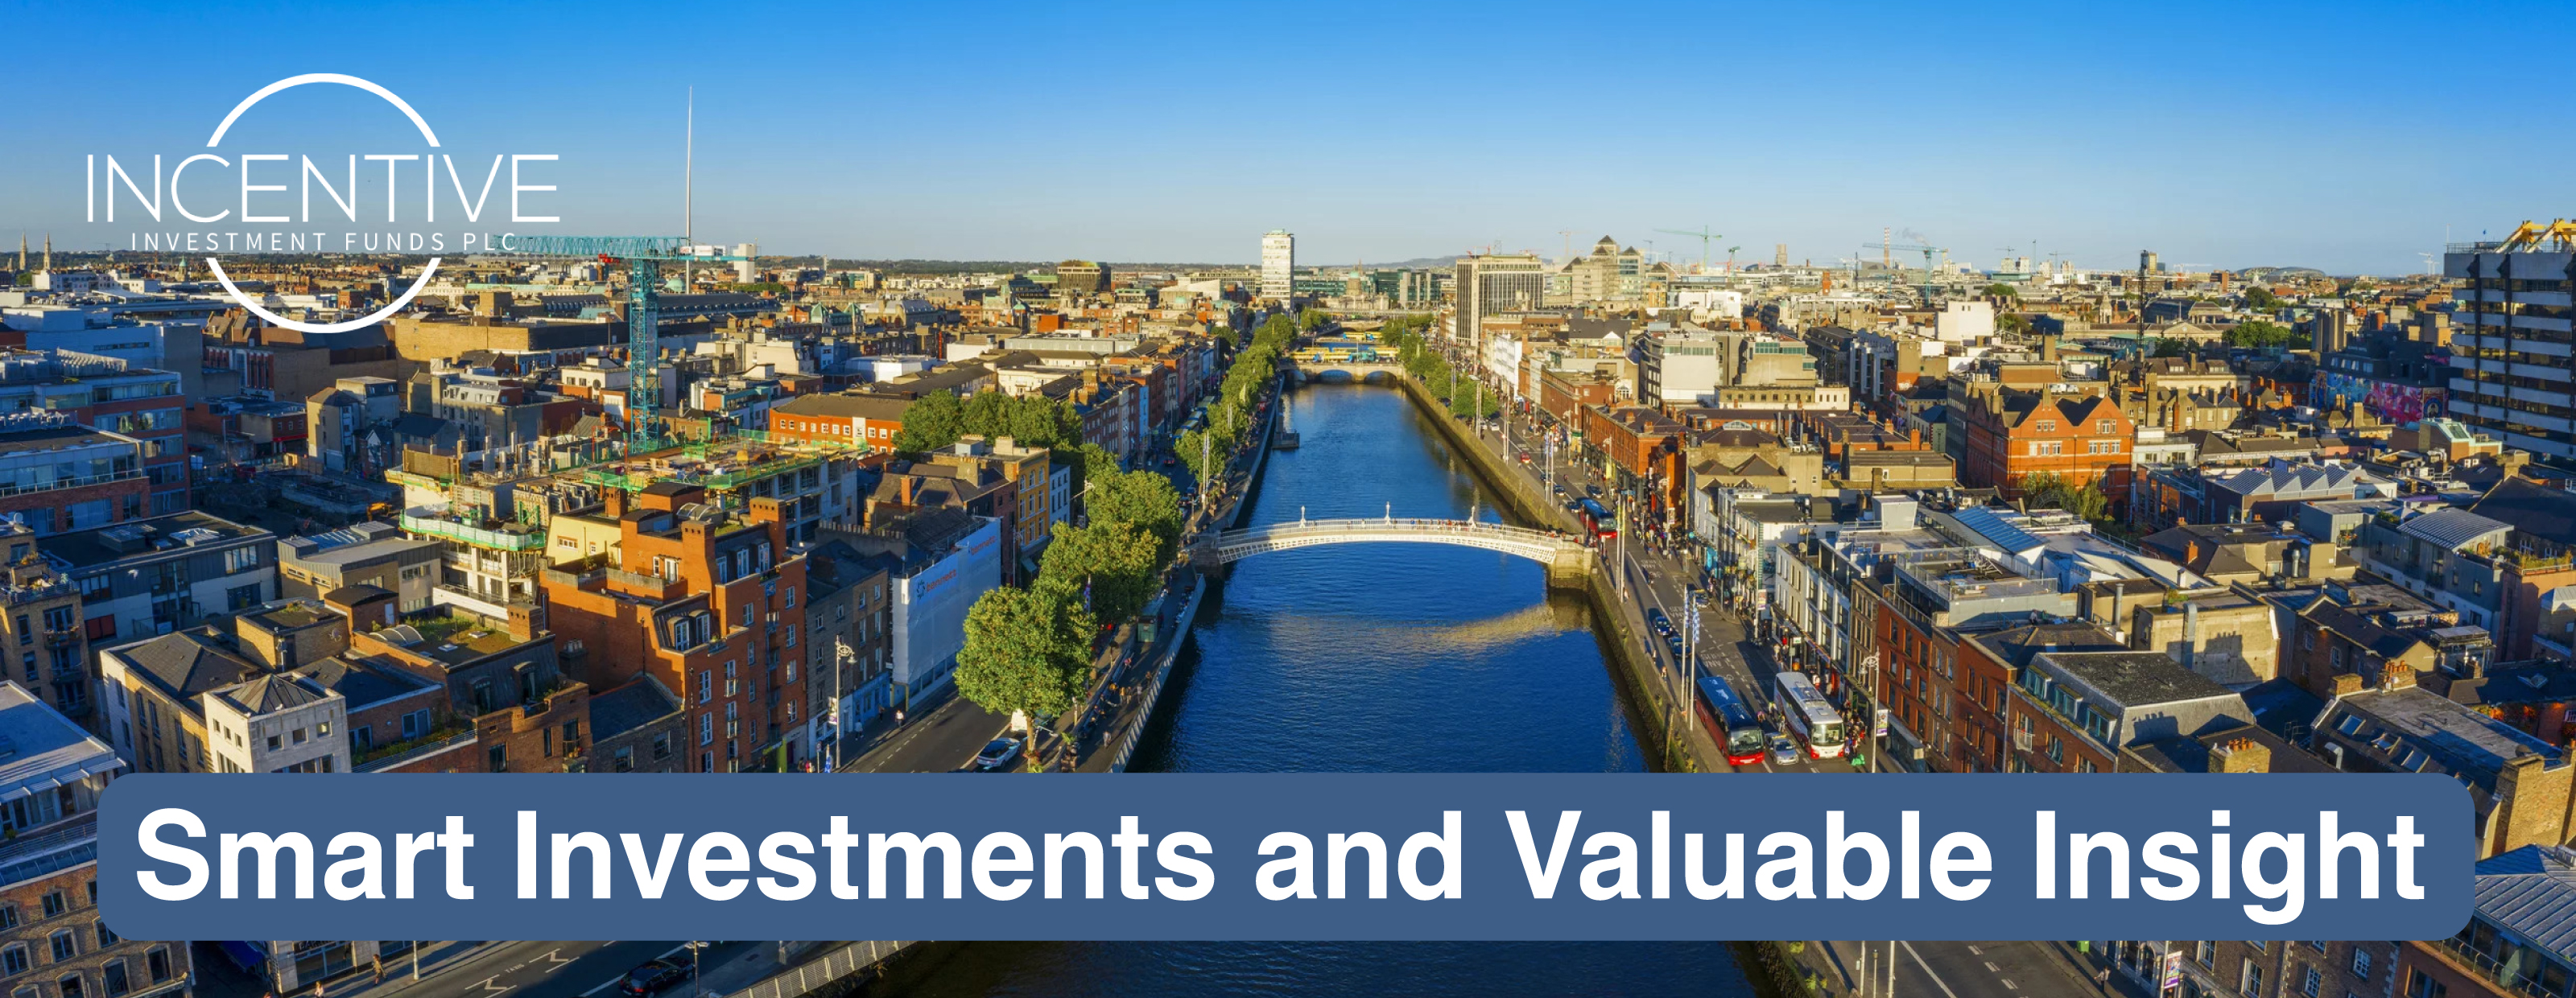 Incentive Investment Funds PLC Leads the Way in Irish Fixed-Income Investments